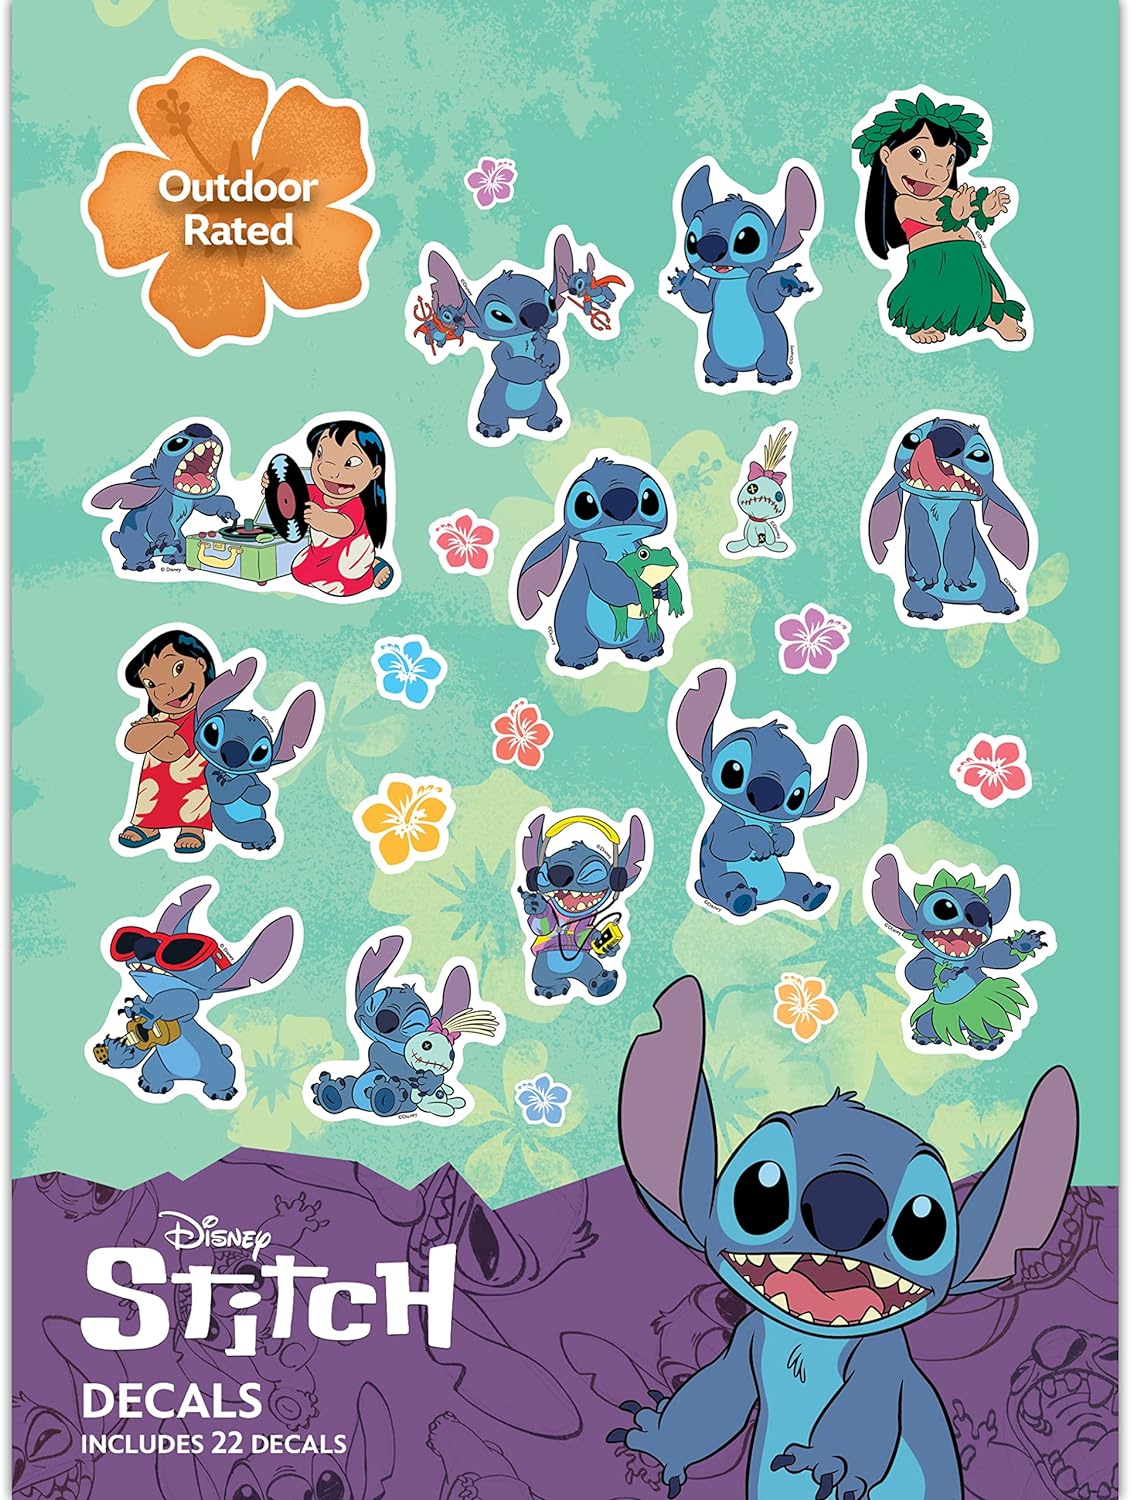 Disney Lilo and Stitch Decals - Set of 22 Lilo and Stitch Stickers for Kids and Adults - Vinyl Decals for Laptop, Tumbler, Water Bottle, Vehicles 